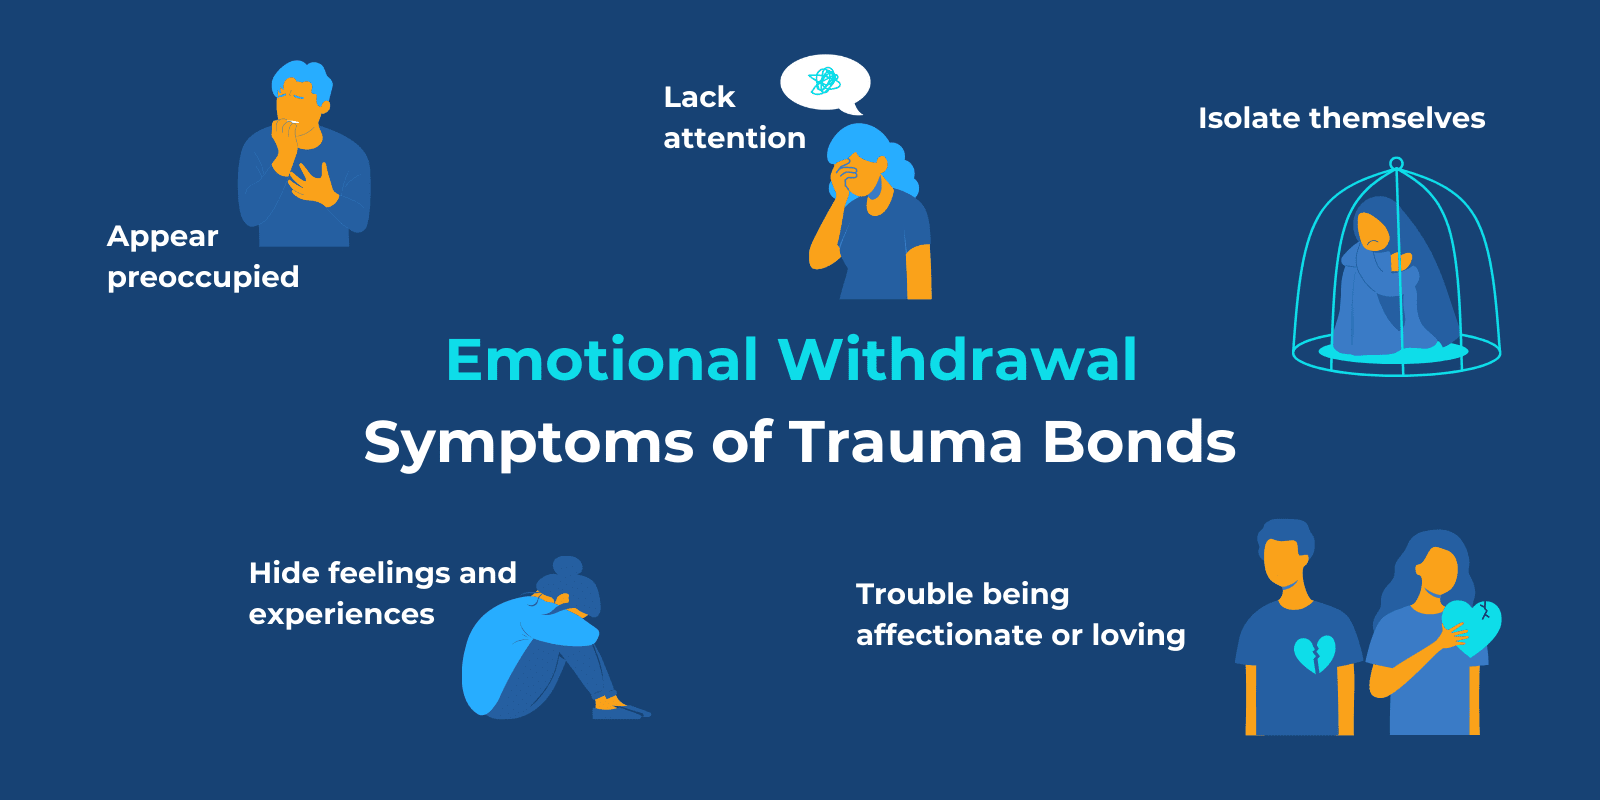 Emotional Withdrawal Symptoms Of Trauma Bonds illustrated around the text with digital graphics